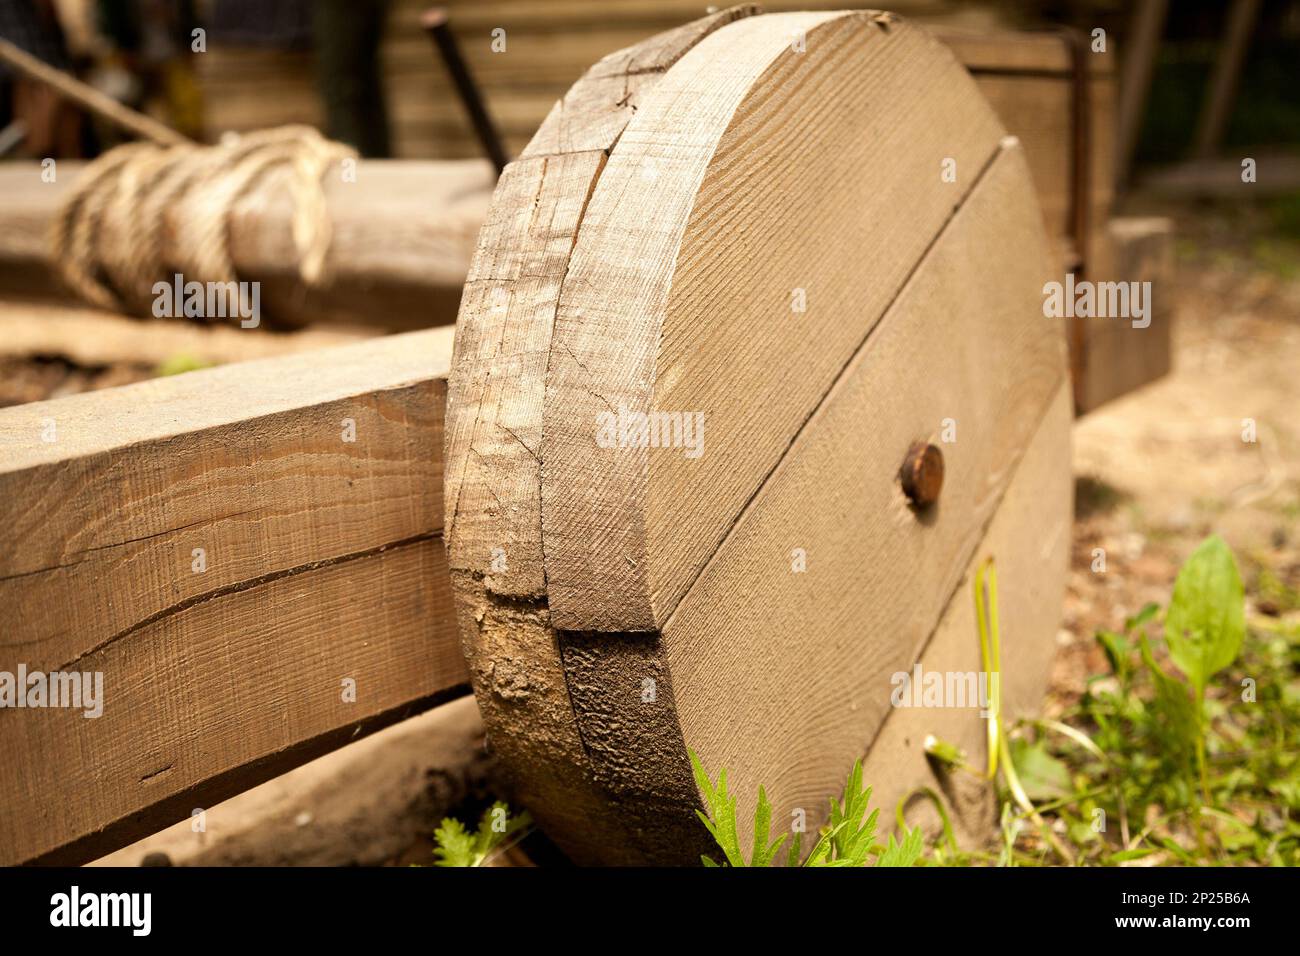 Historical wooden catapult wheel. Trebuchet medieval weapon close-up Stock Photo